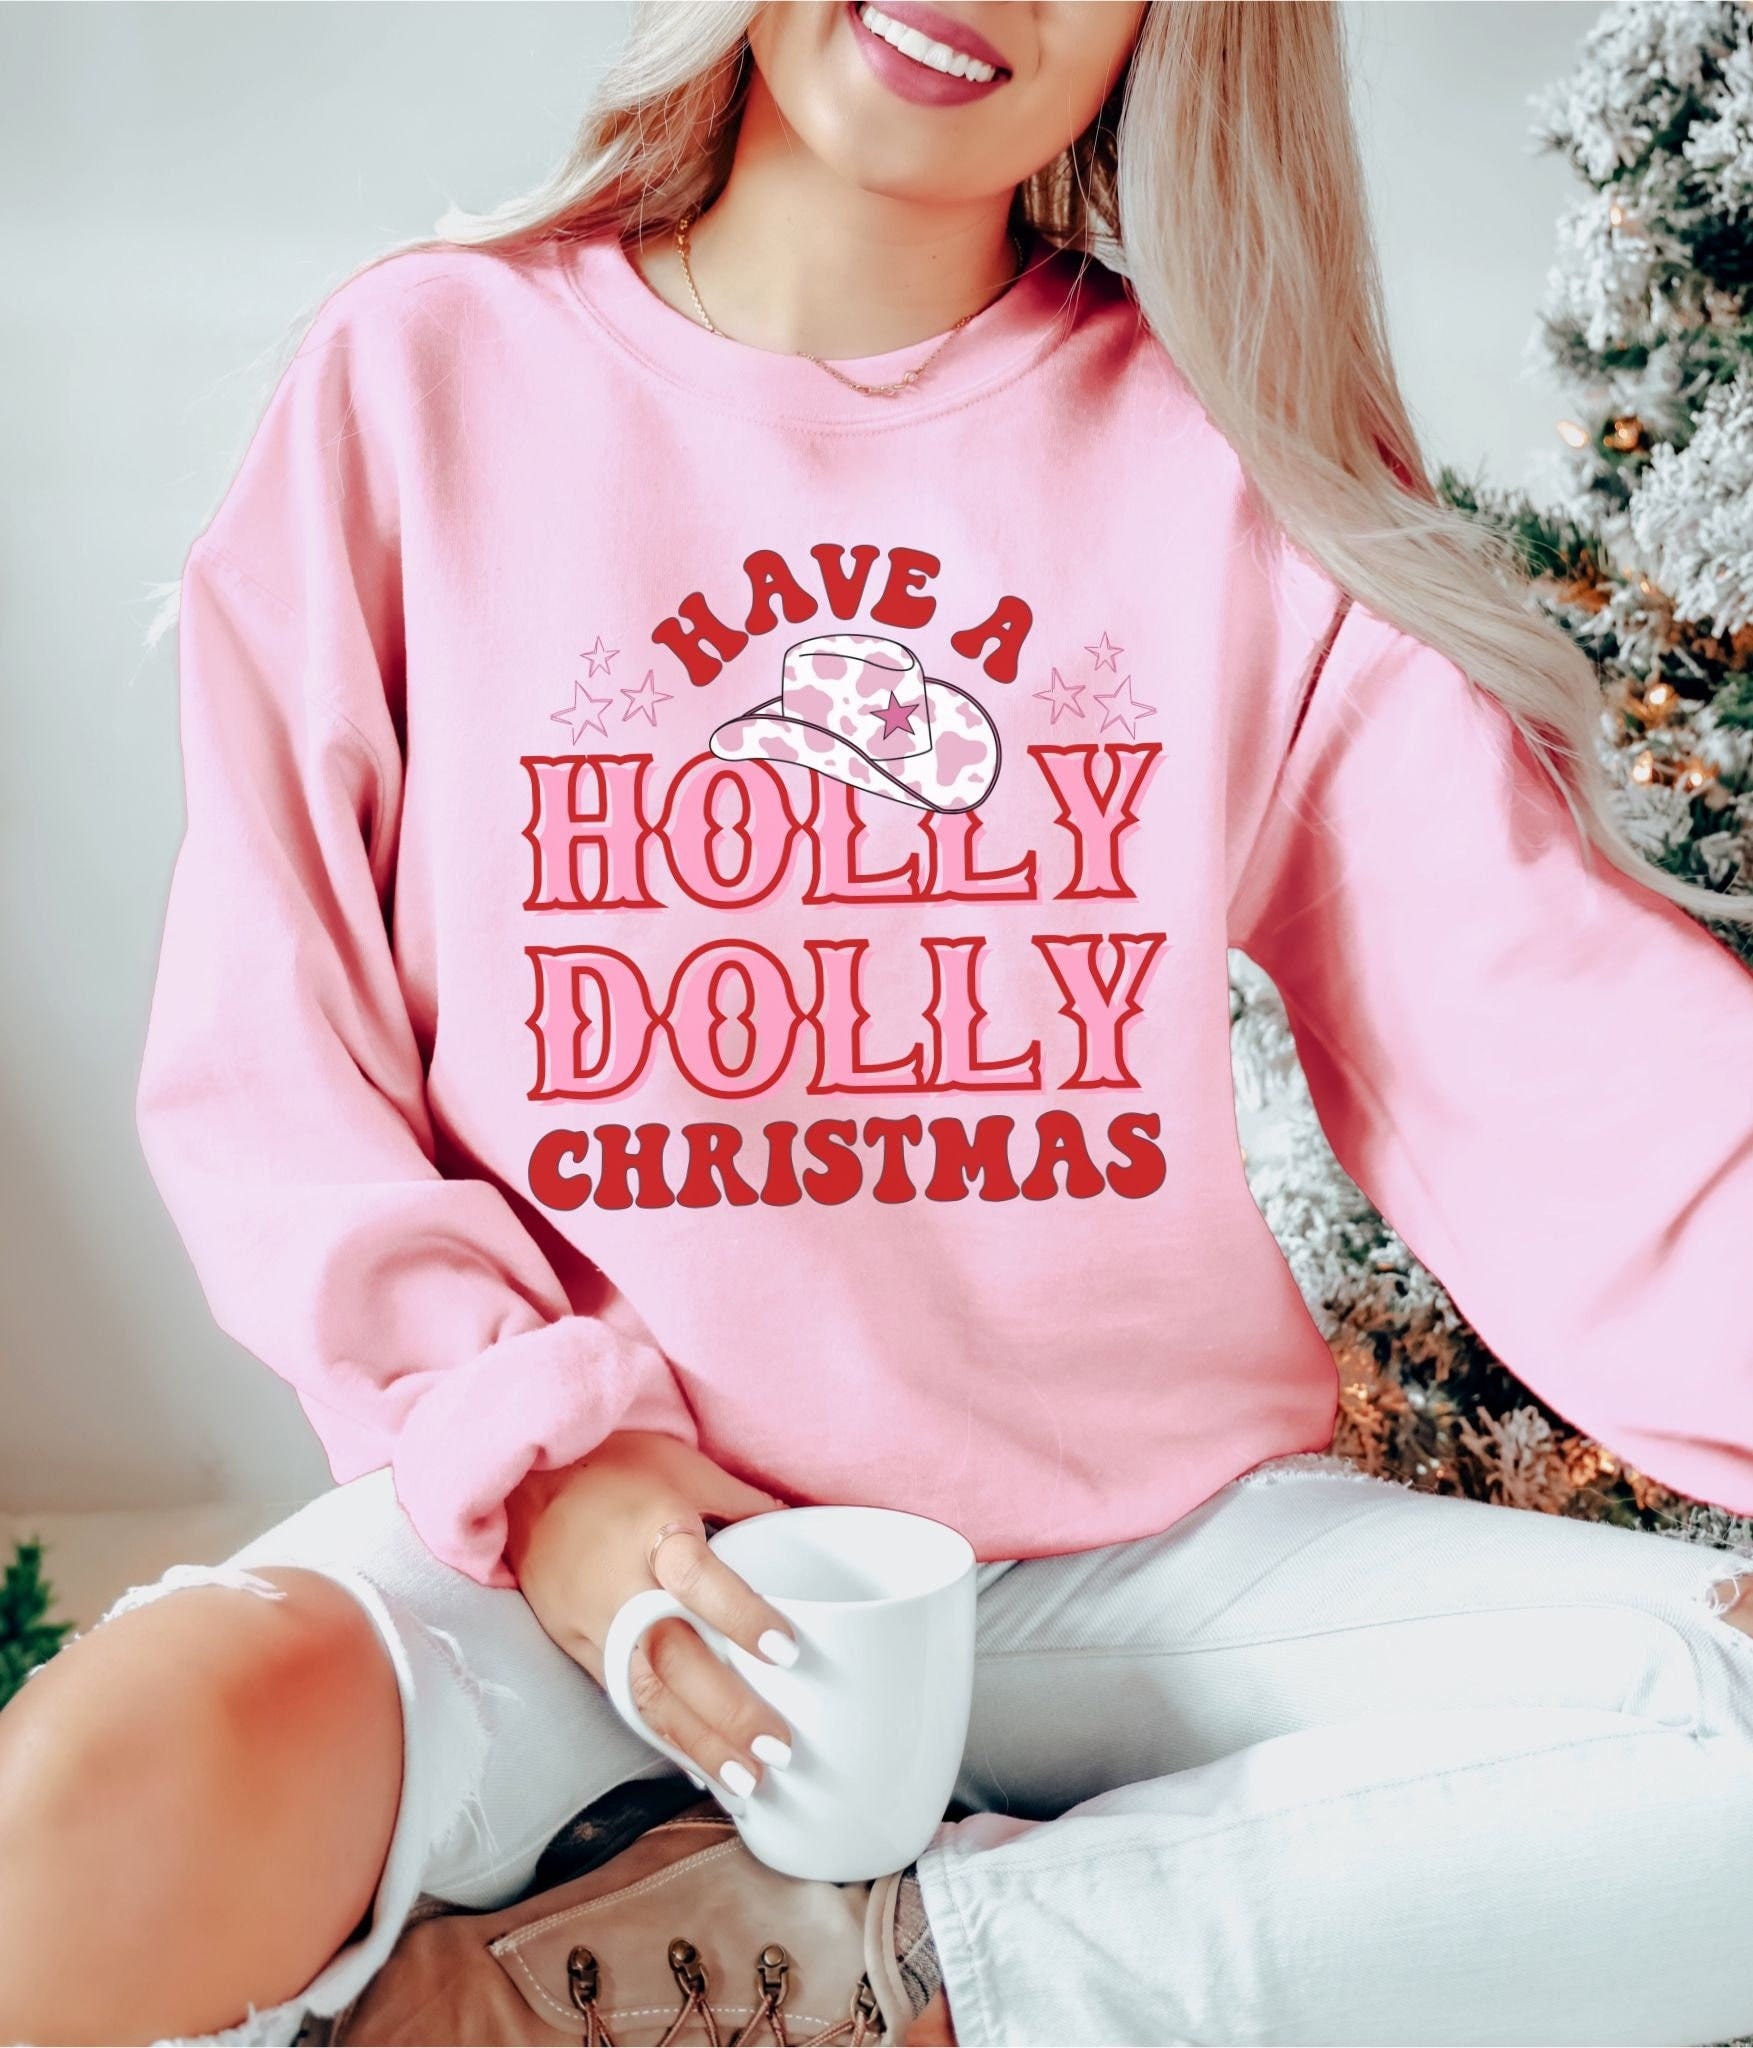 Holly Dolly Christmas Sweatshirt, Western Christmas, Cowgirl Christmas Shirt, Country Christmas Sweater, Best Friend Gift, Family Christmas